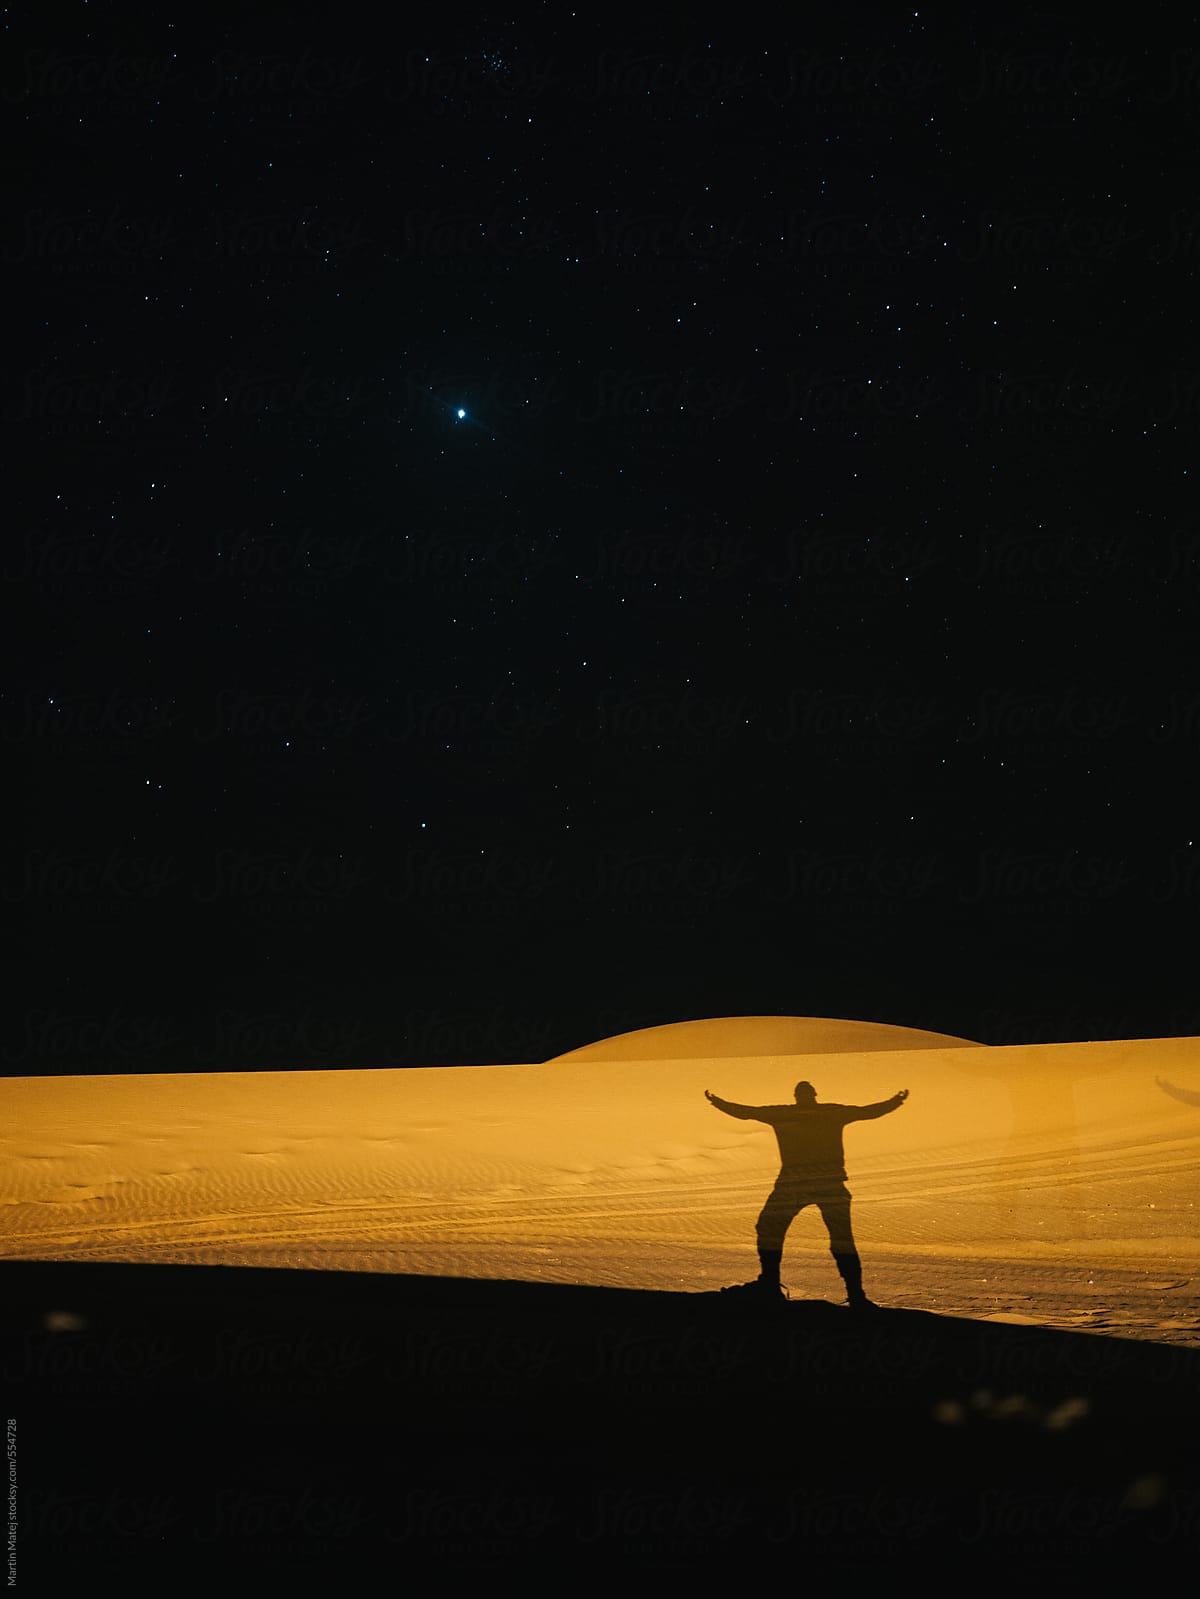 Shadow in the desert with spread hands under the stars